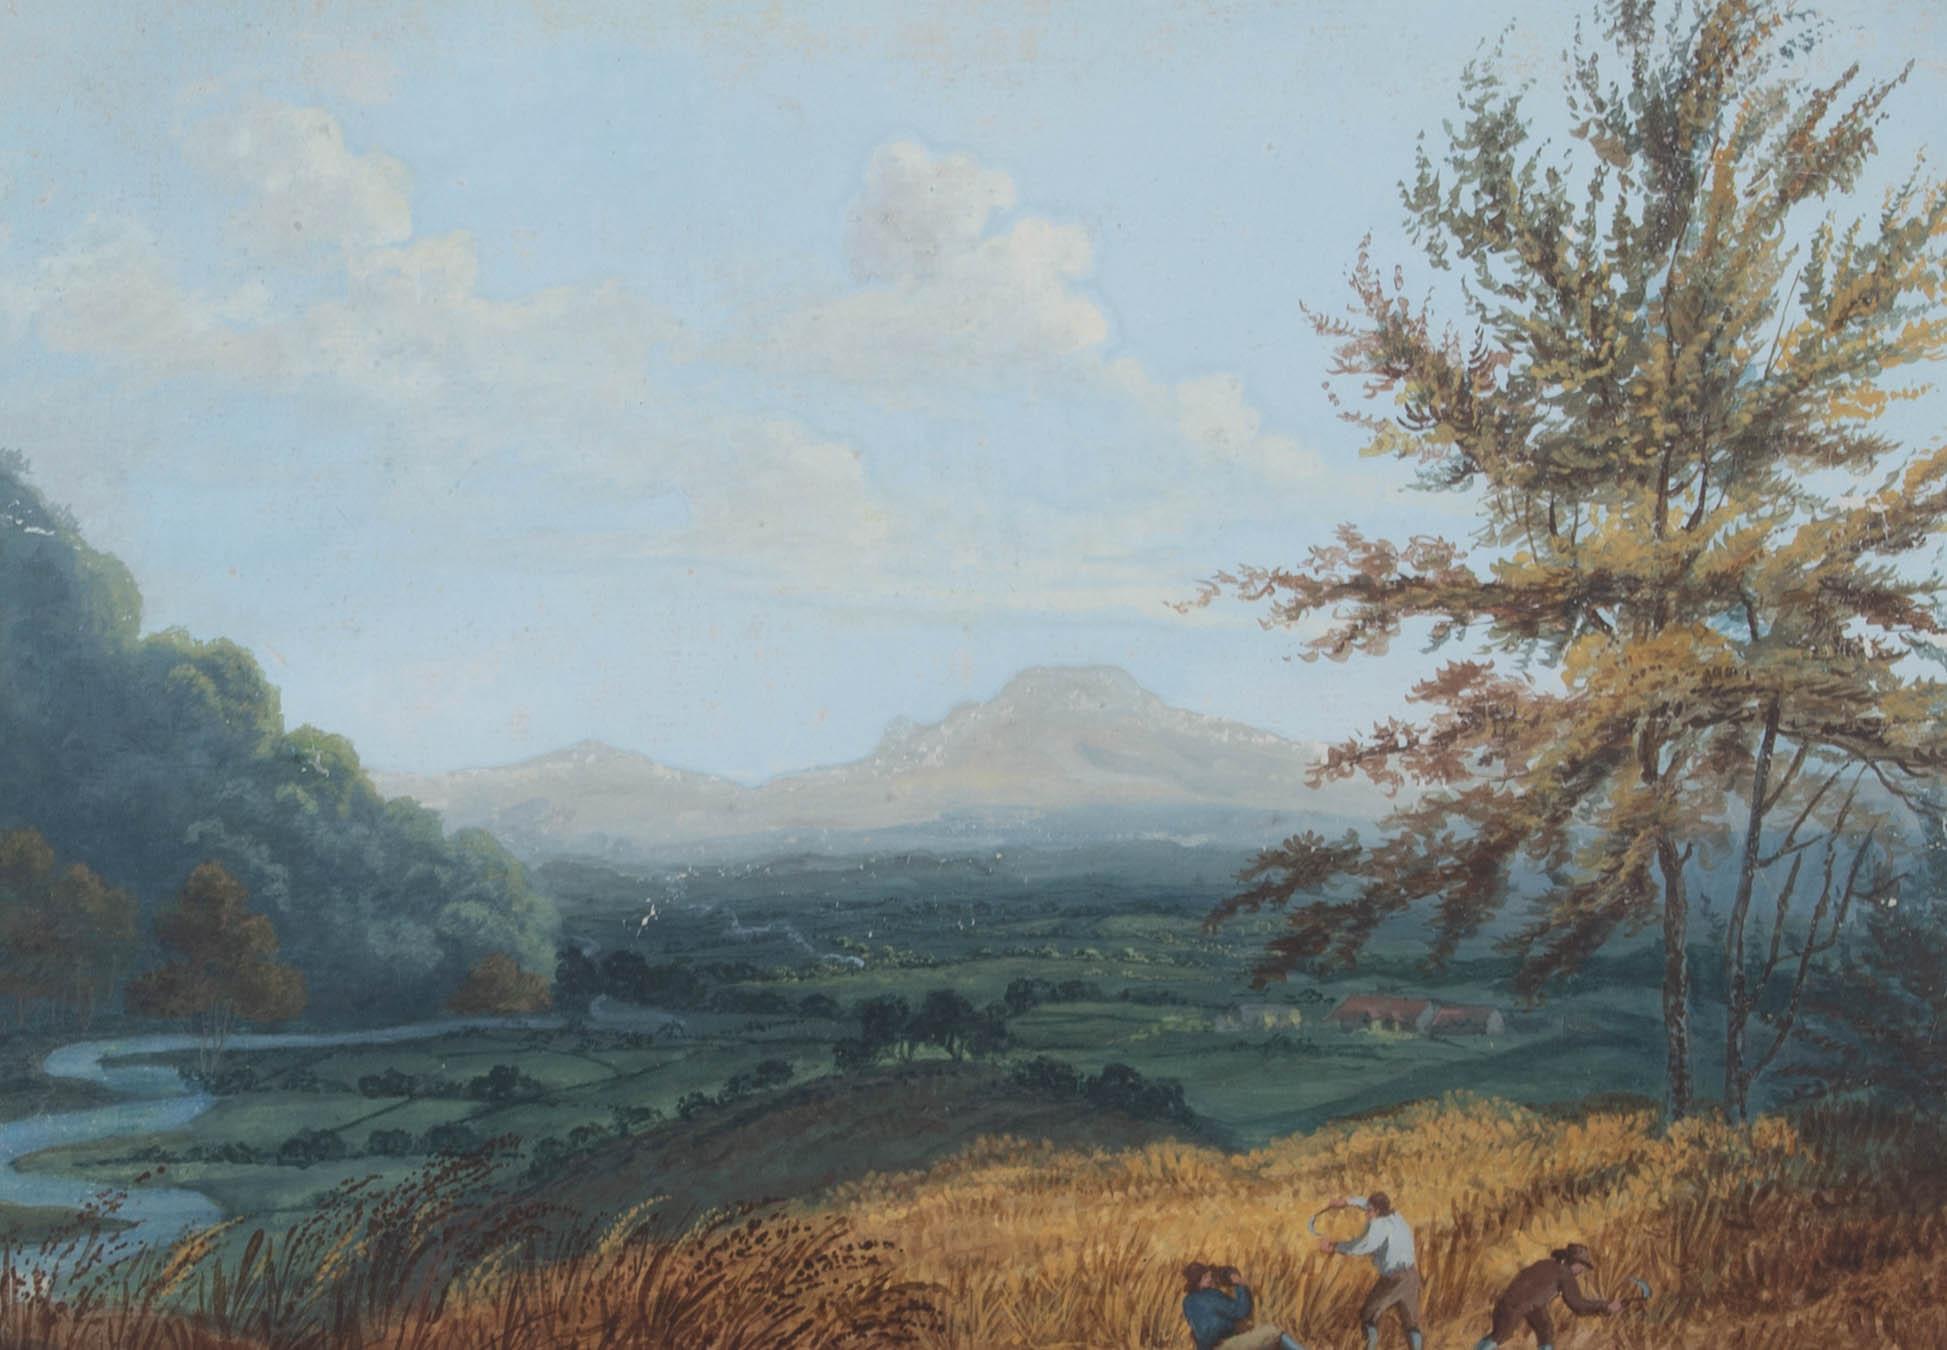 A fine gouache and watercolour landscape. Figures wield sickles in the foreground while a river winds through the countryside towards the mountains in the distance. Very well presented glazed in a wash line mount and a birdseye maple veneer frame.